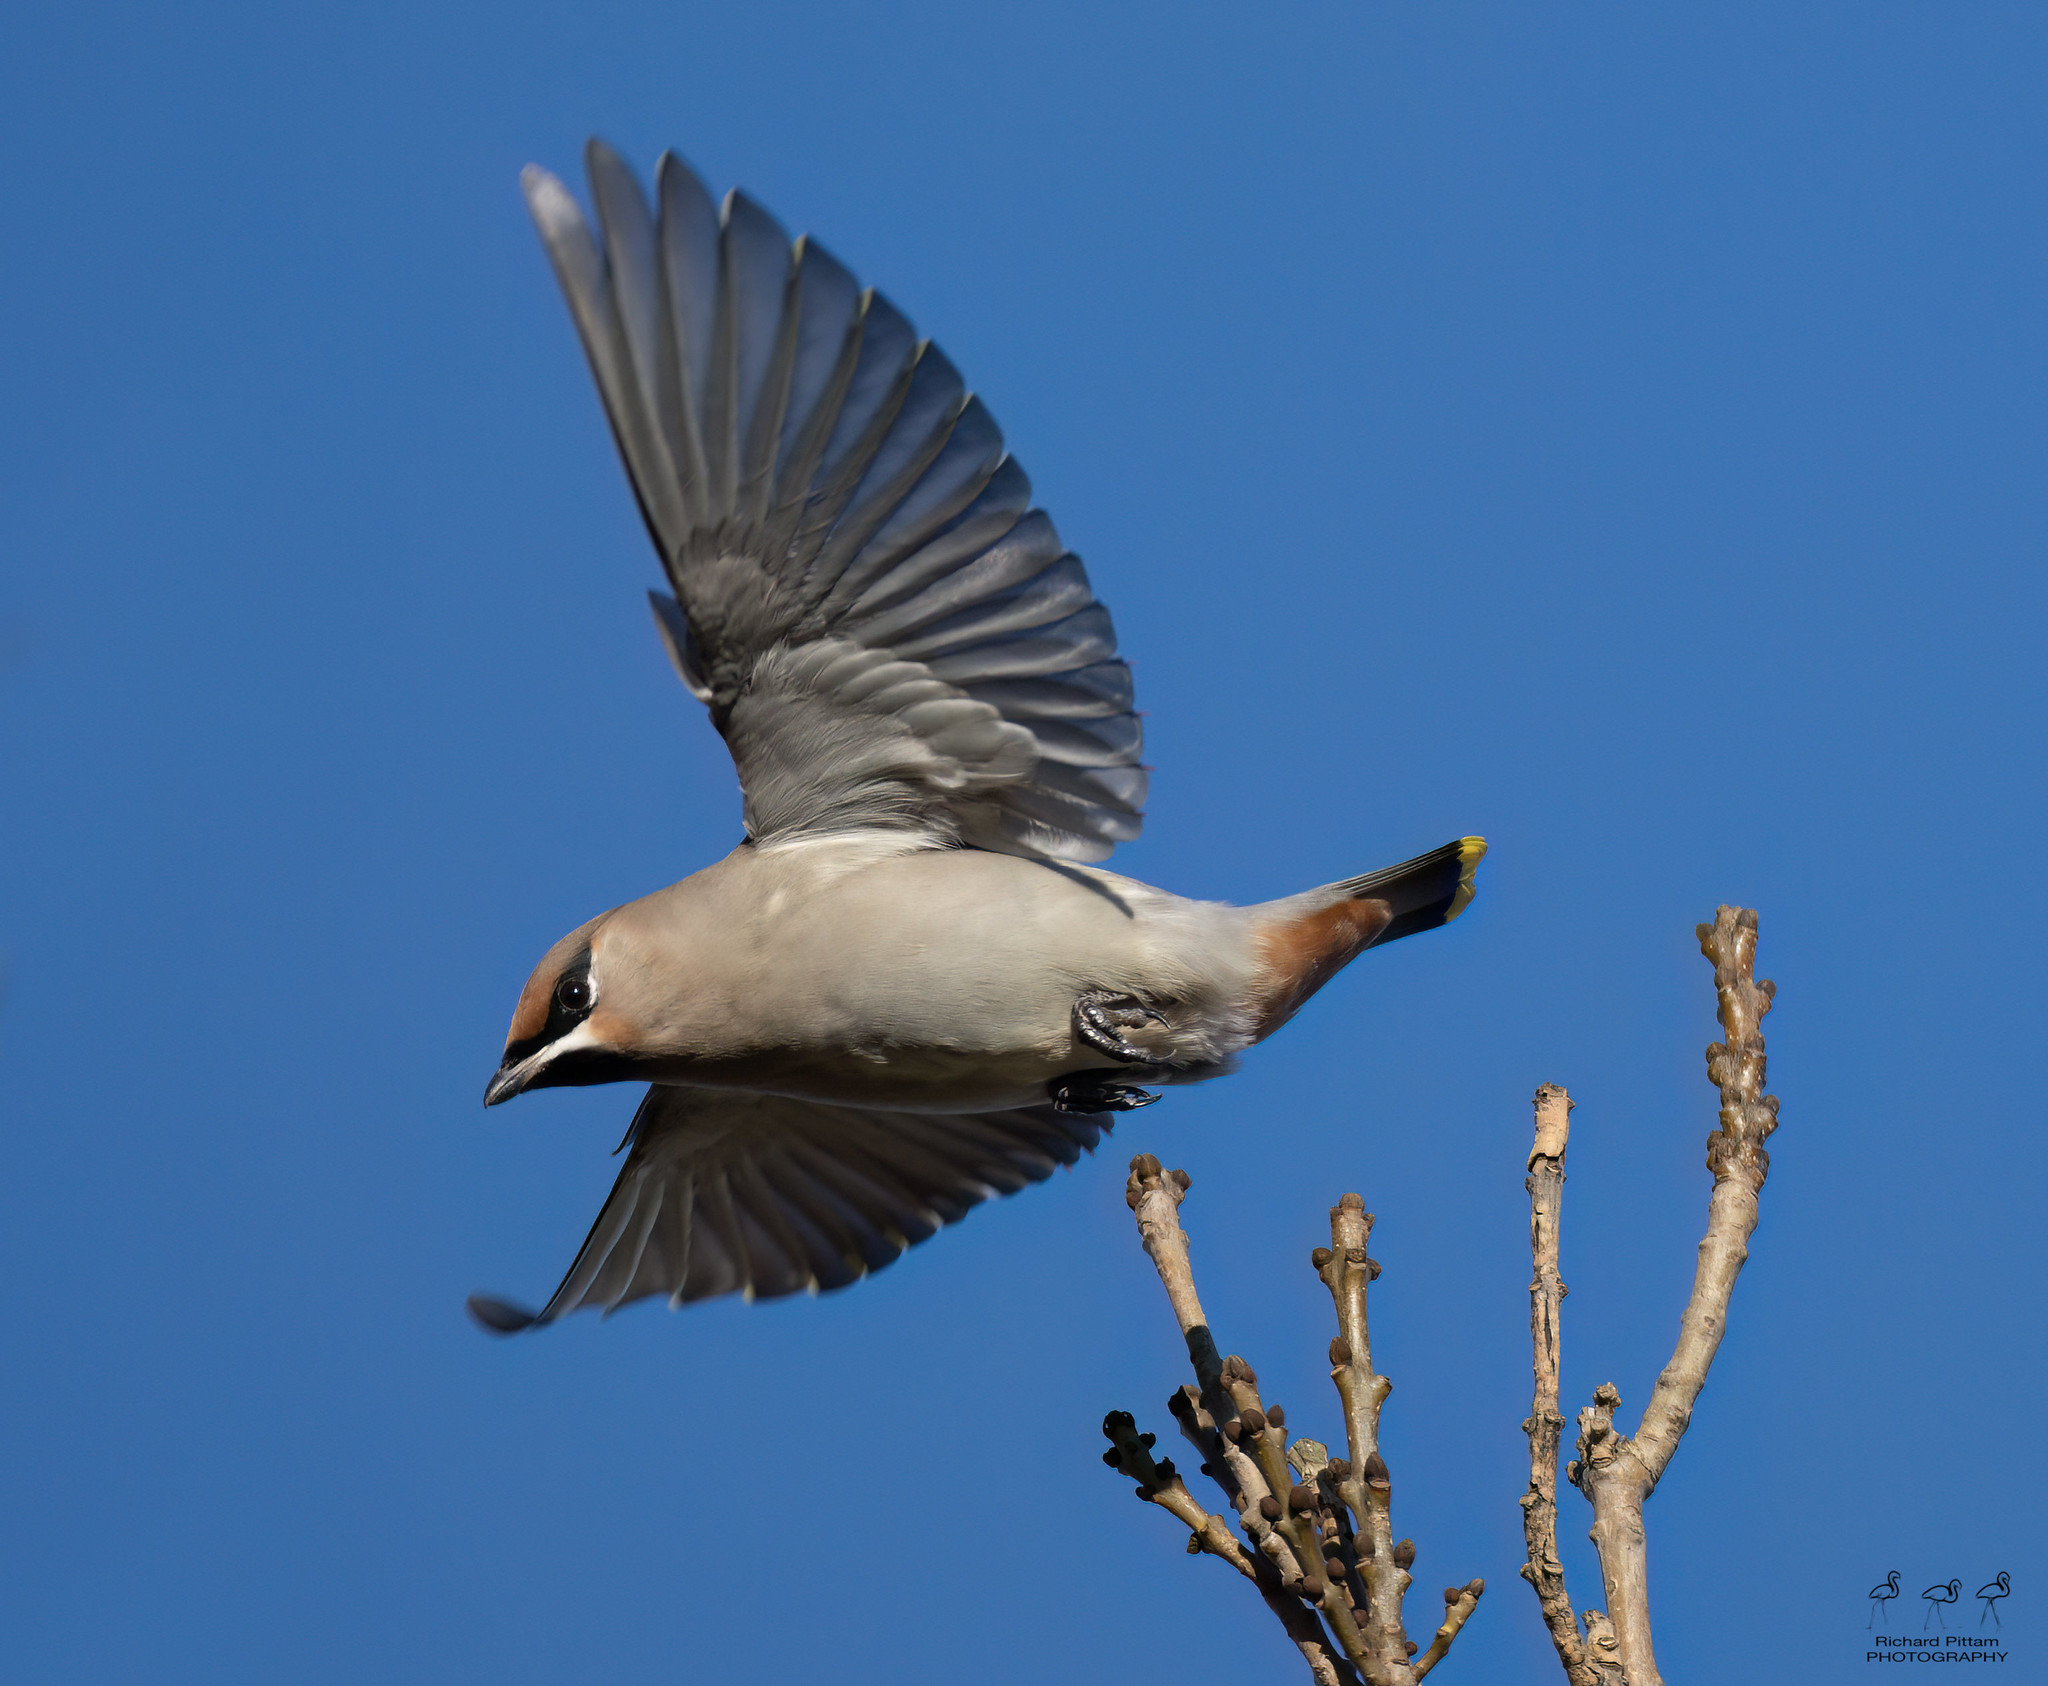 Bohemian Waxwing - a wonderfully-coloured Winter visitor from Scandinavia.